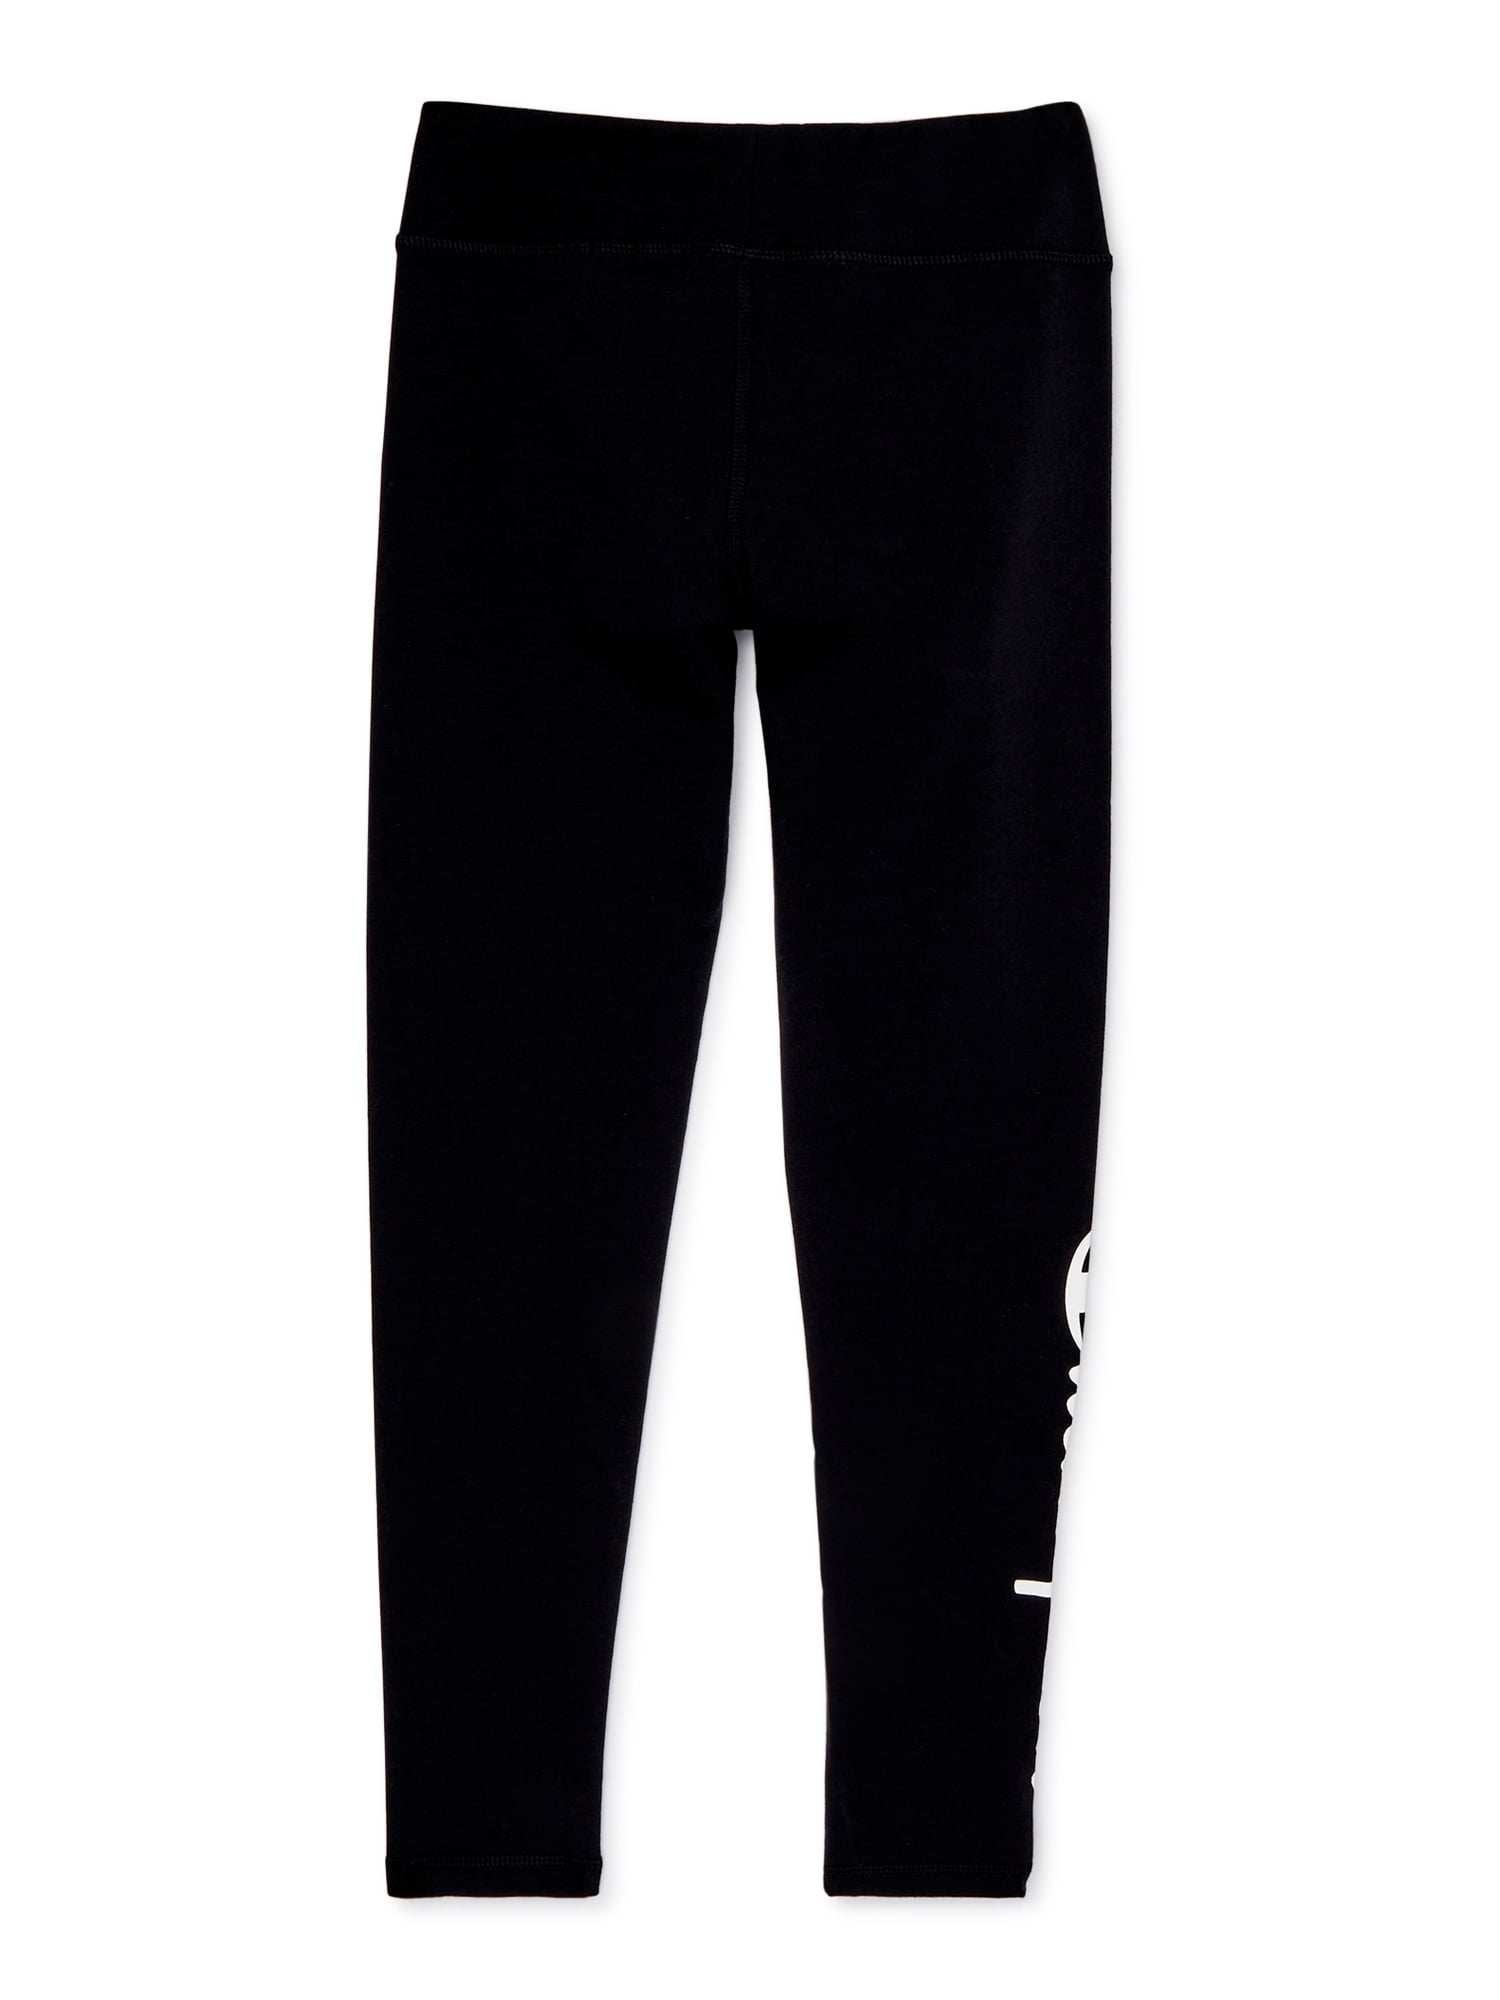 Buy Authentic Leggings (7-16) Girls Bottoms from Champion. Find